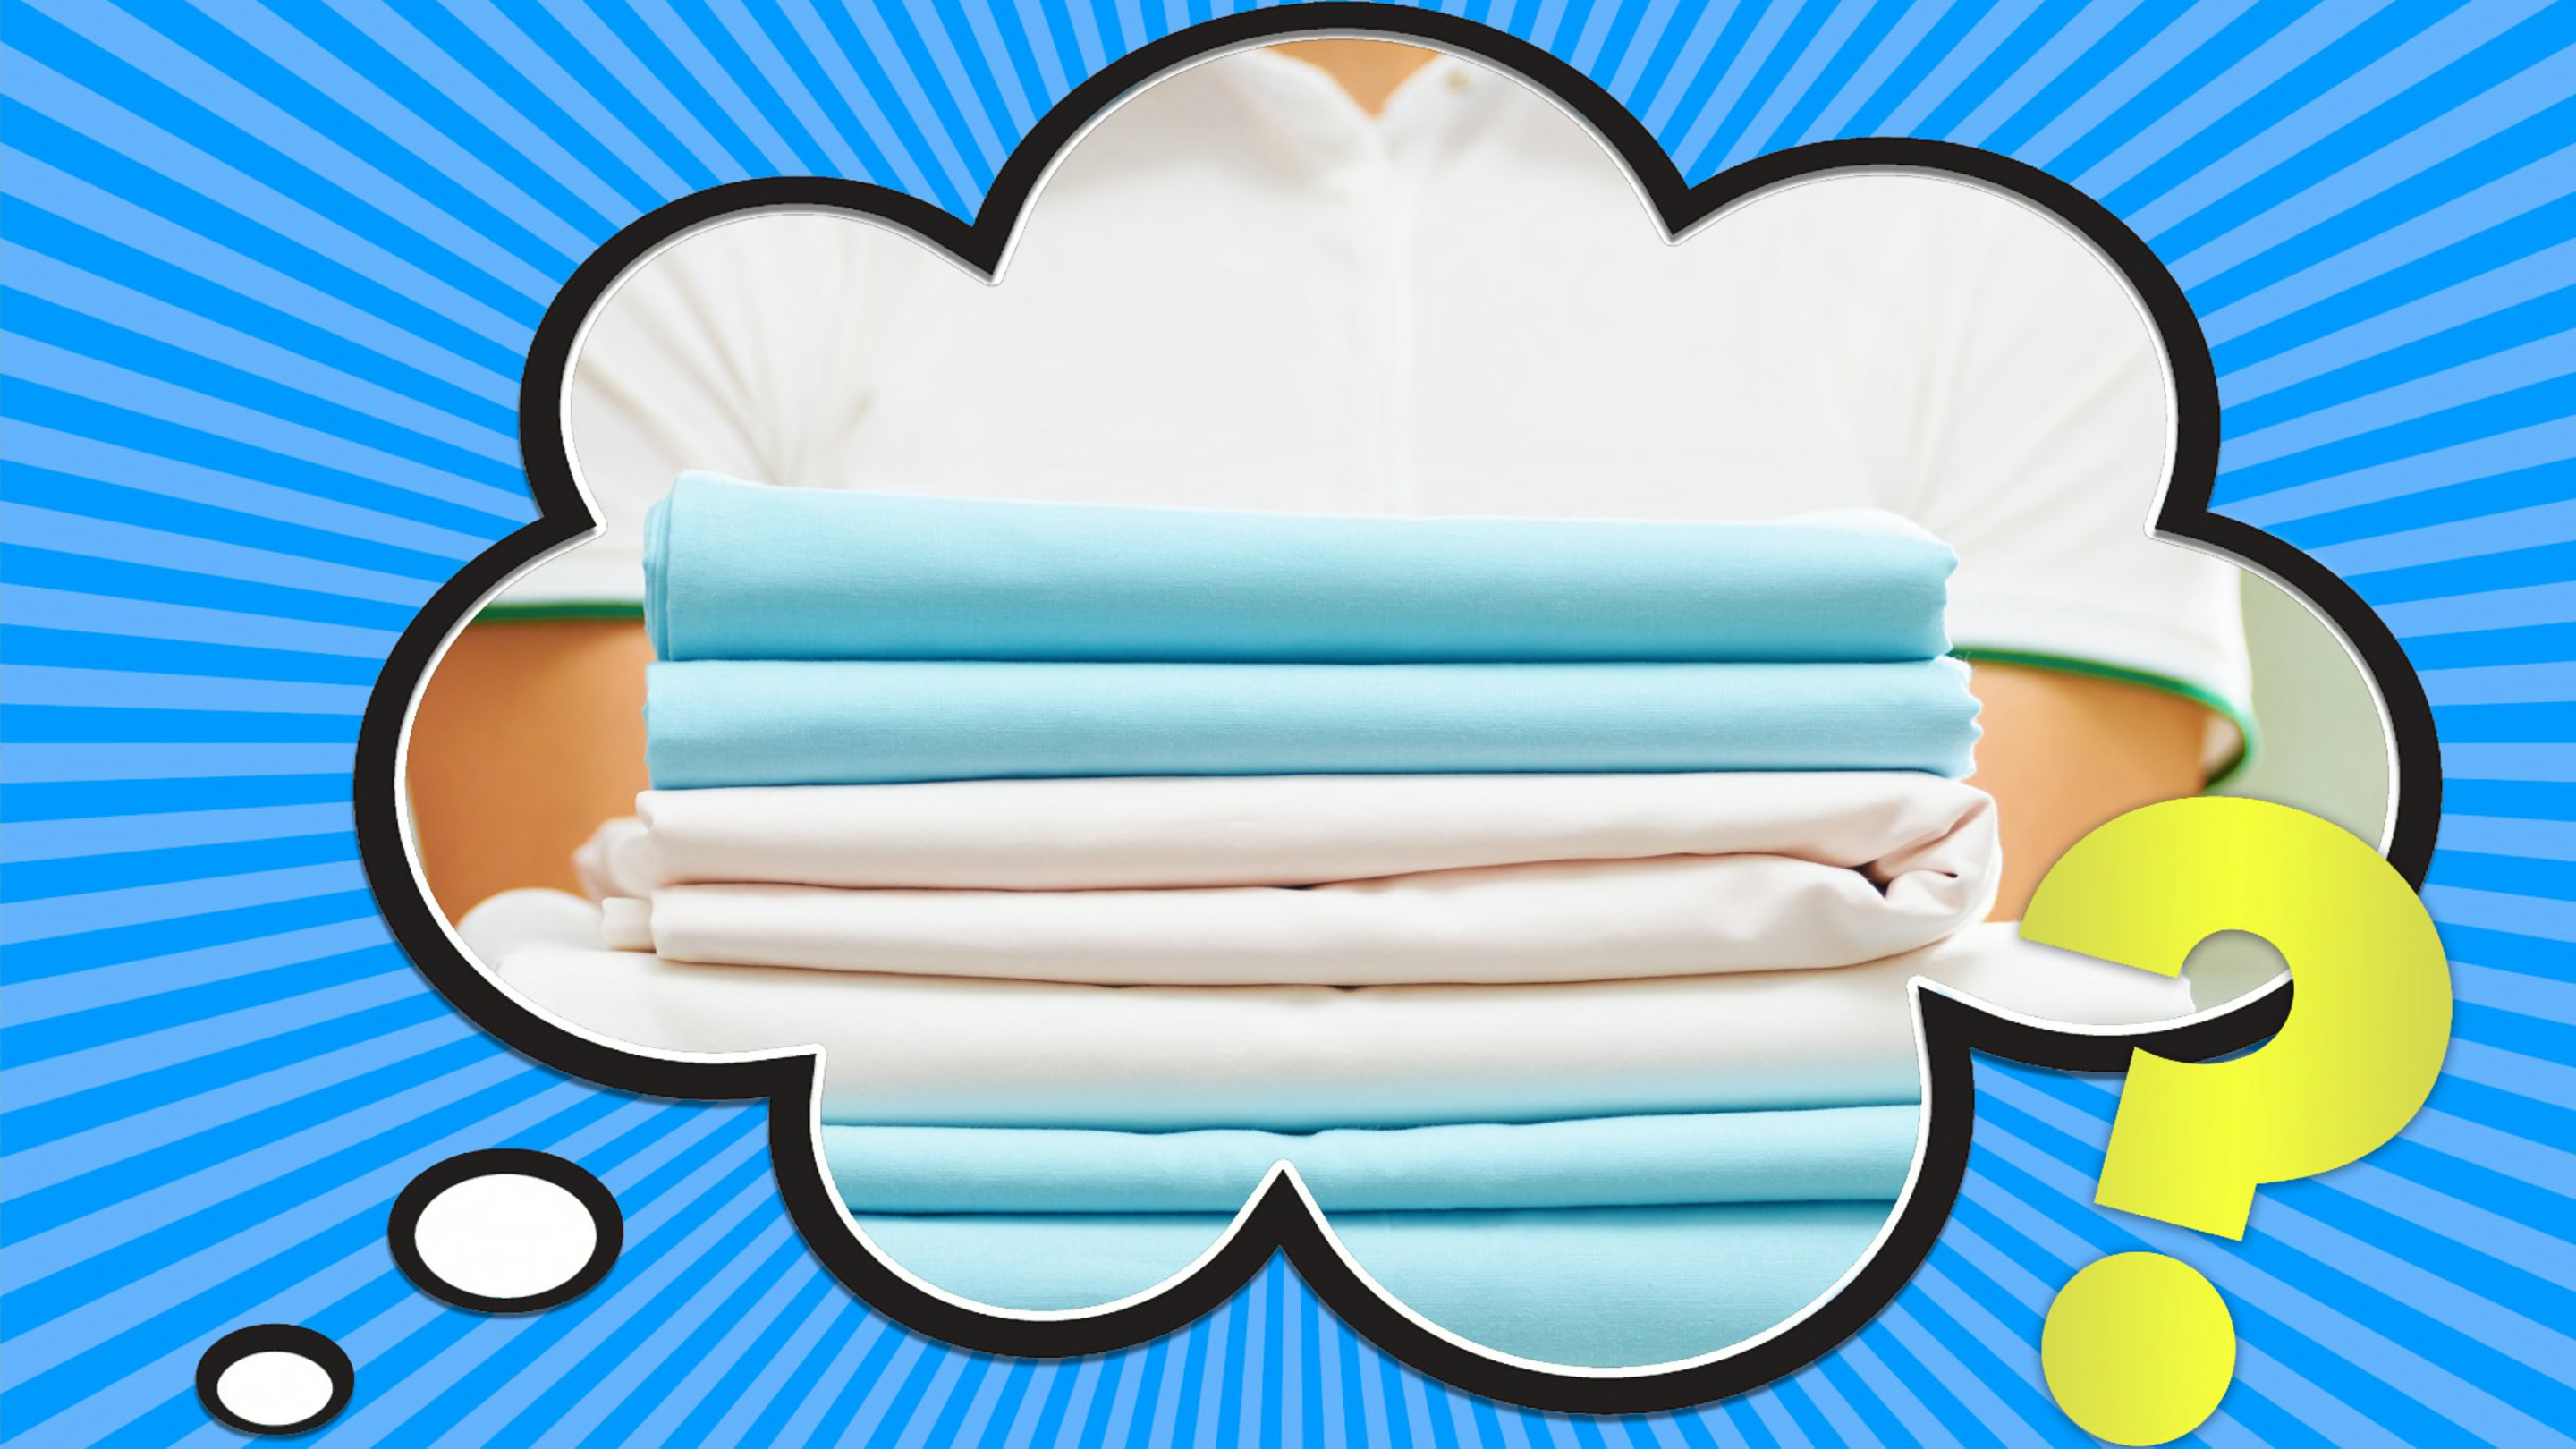 What Does Thread Count Really Mean for Bed Sheets—and Does It Even
Matter?